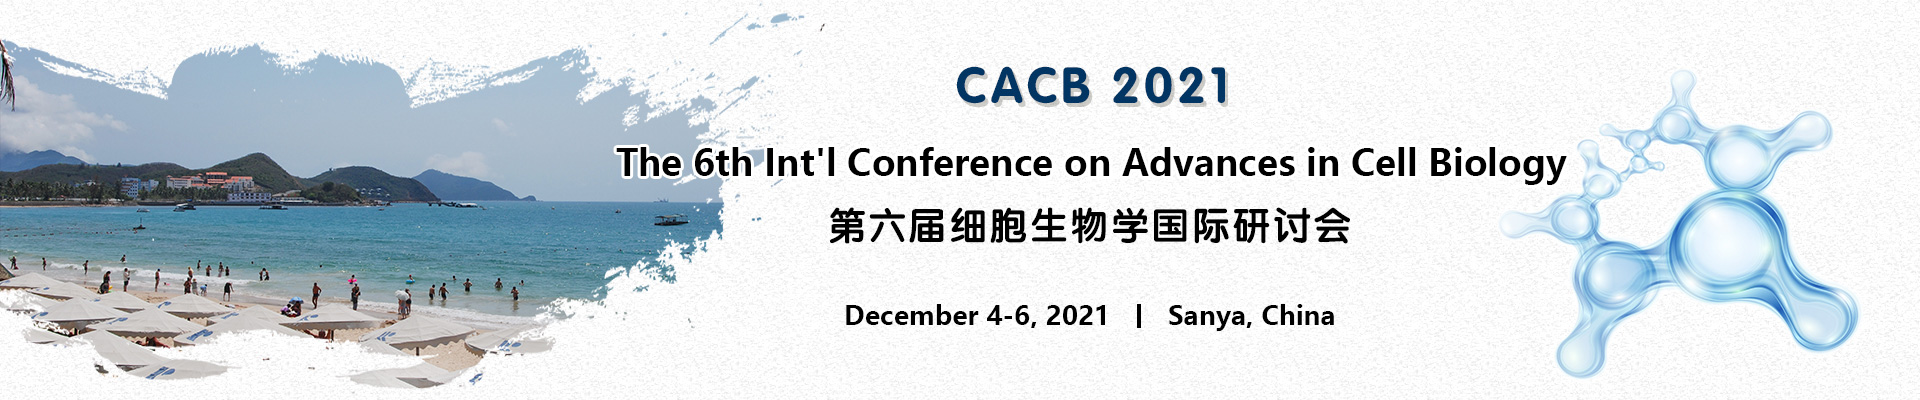 The 6th Int'l Conference on Advances in Cell Biology (CACB 2021), Sanya, Hainan, China